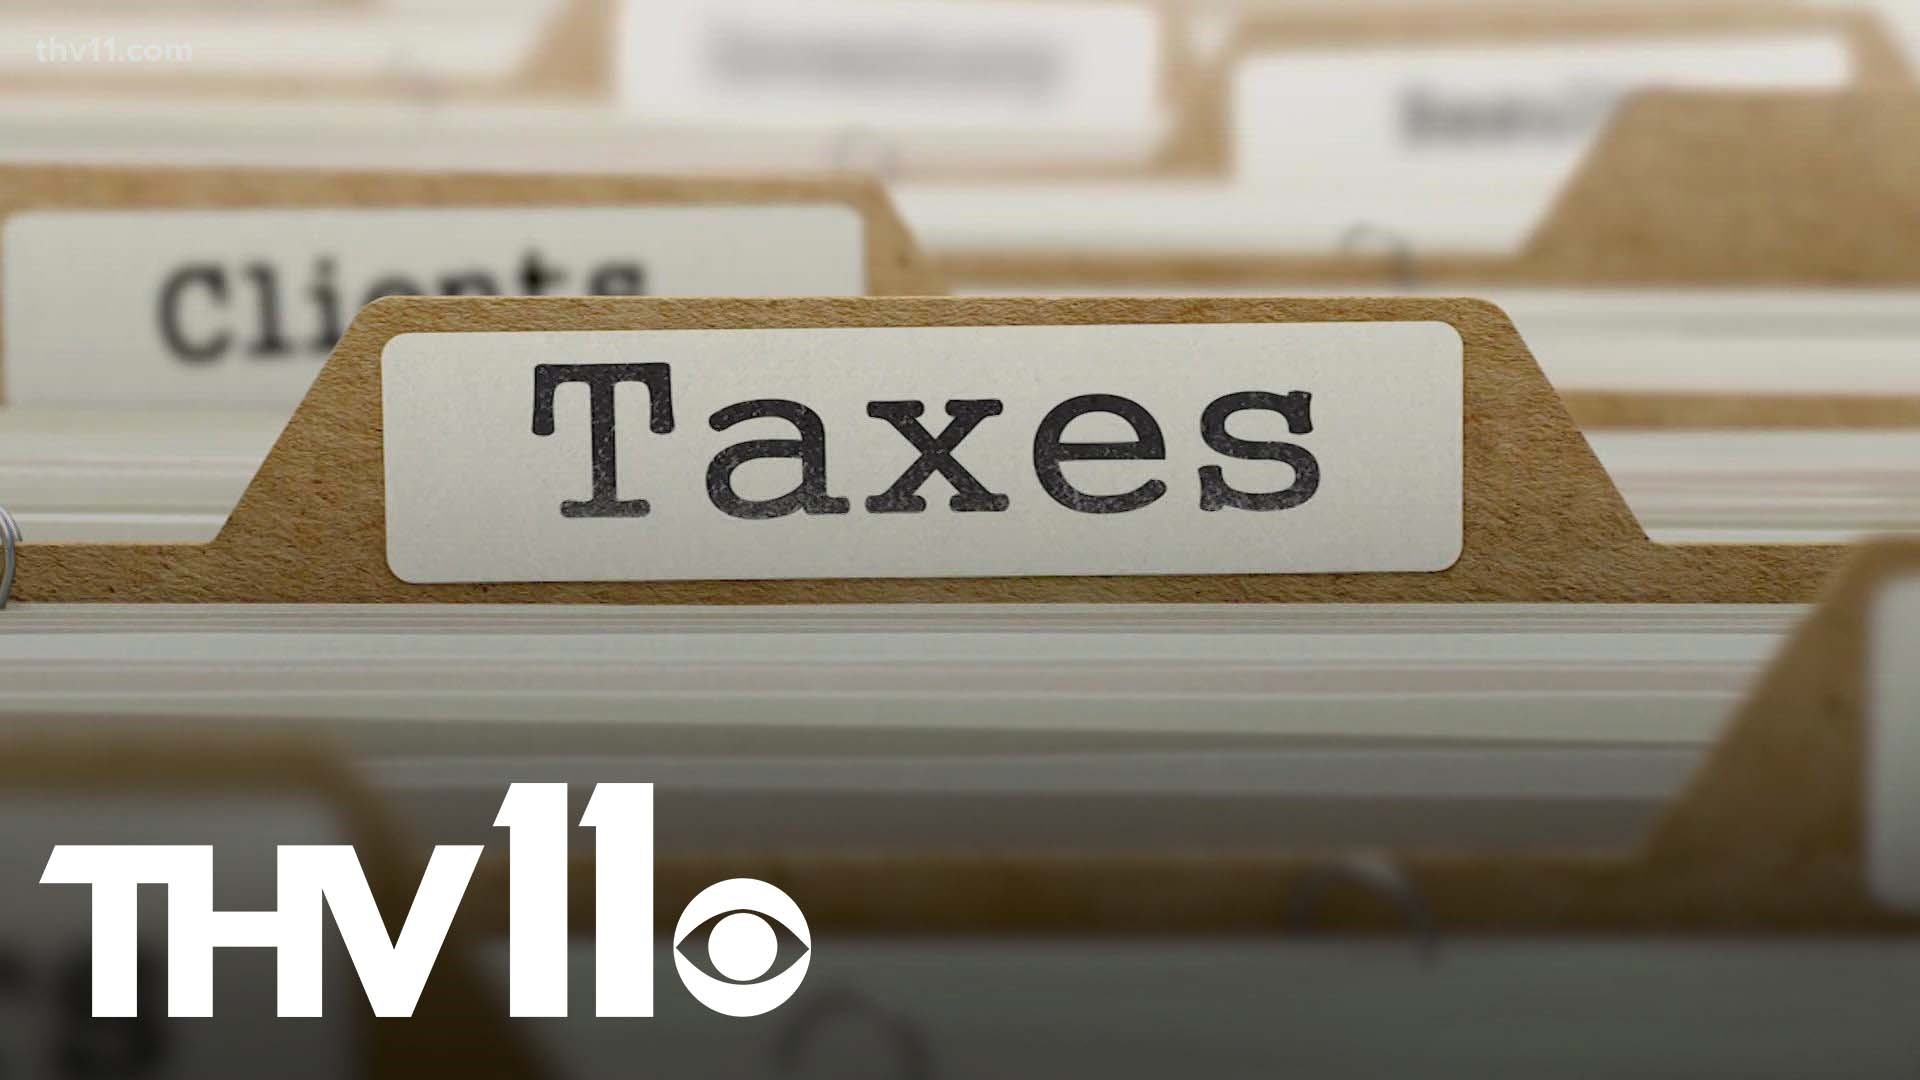 Tax season is just around the corner, and this year could be a tough one for taxpayers and the IRS.